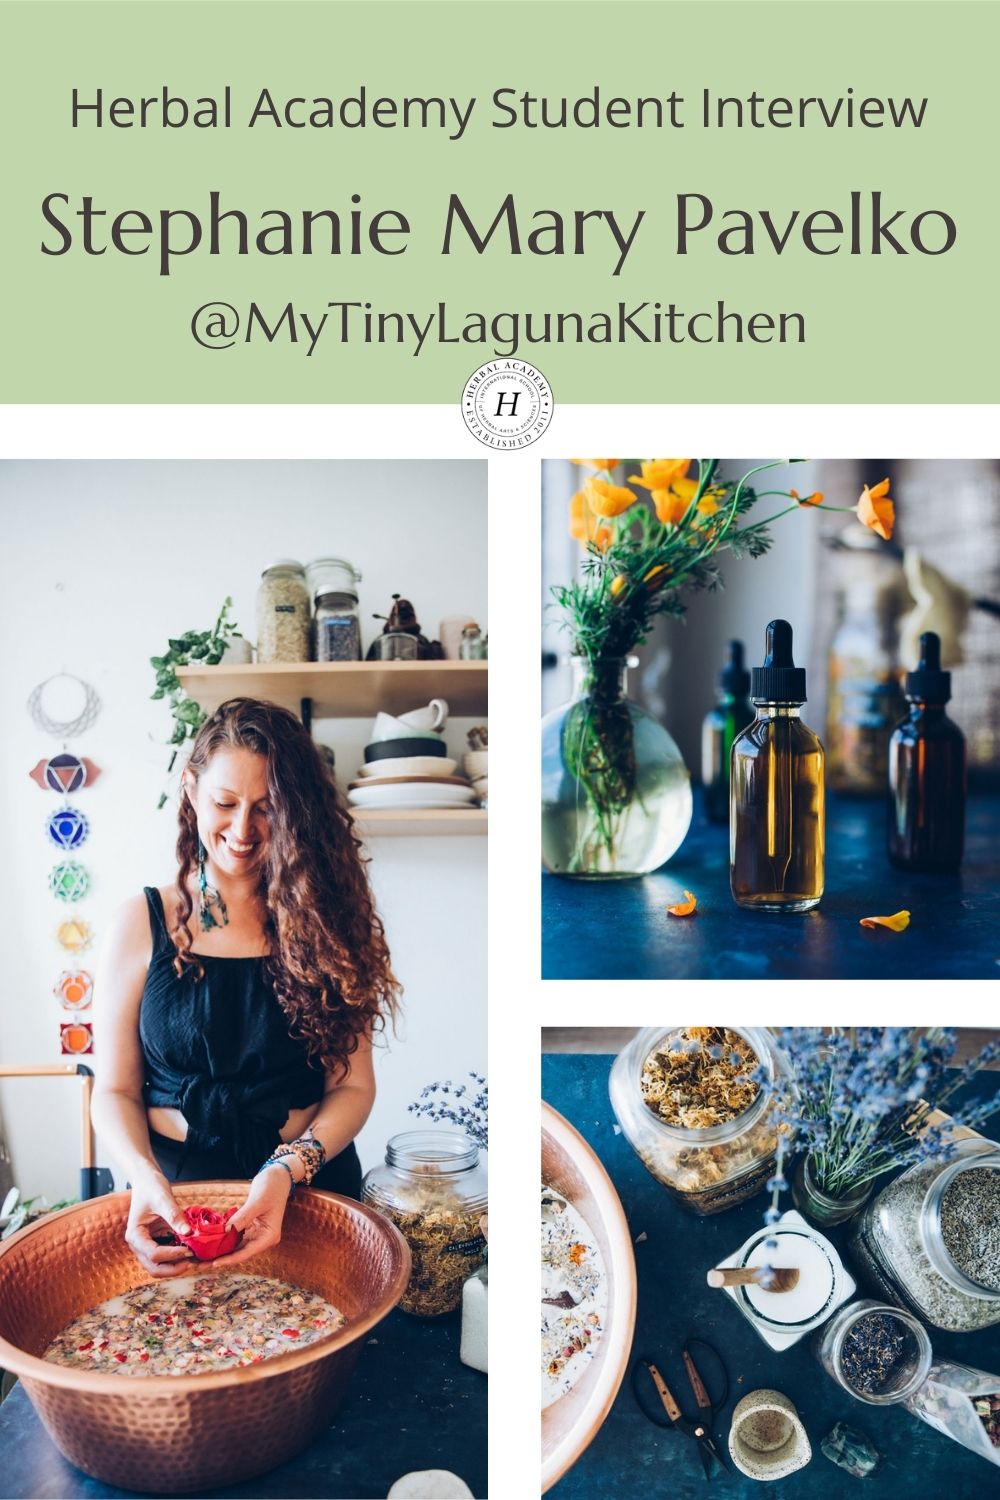 Student Feature: Stephanie Mary Pavelko (@MyTinyLagunaKitchen) | Herbal Academy | In the third installment of our Student Feature Series, we chatted with herbal blogger and photographer Stephanie Mary Pavelko.